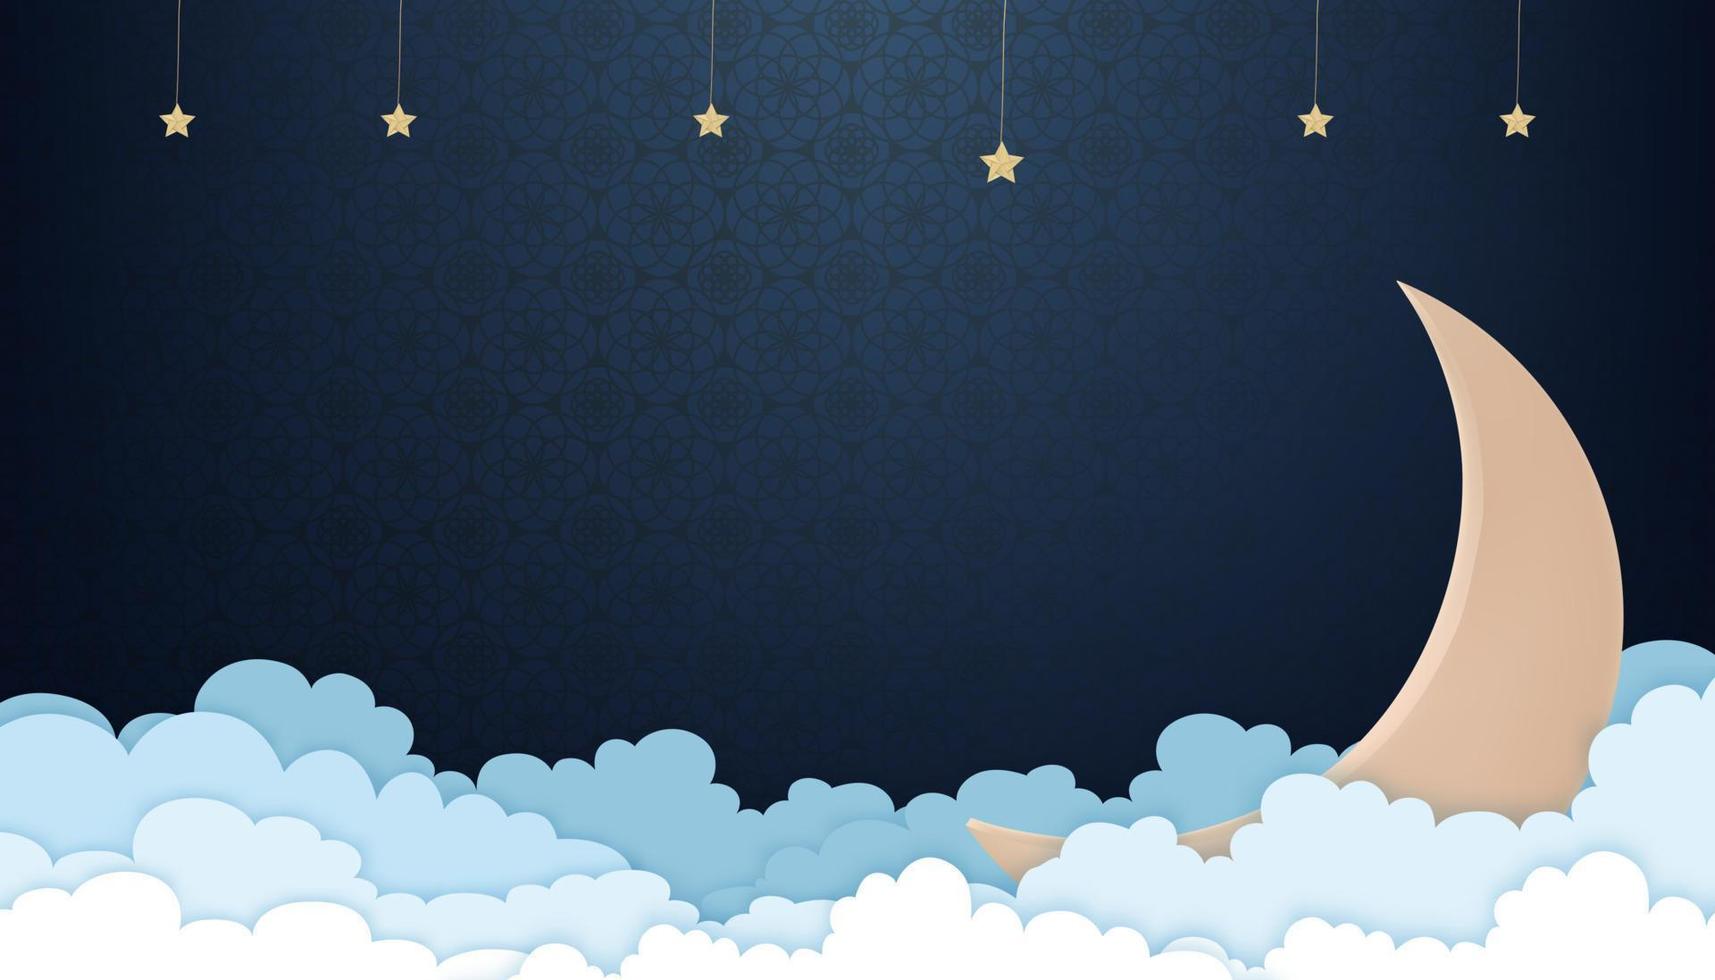 Ramadan Kareem background,Horizon Sale Header,Voucher Template with Crescent Moon,3d Paper cut Cloud and Star on islamic,arabic pattern on Blue Background.Vector Traditional Lanterns or Place for Text vector